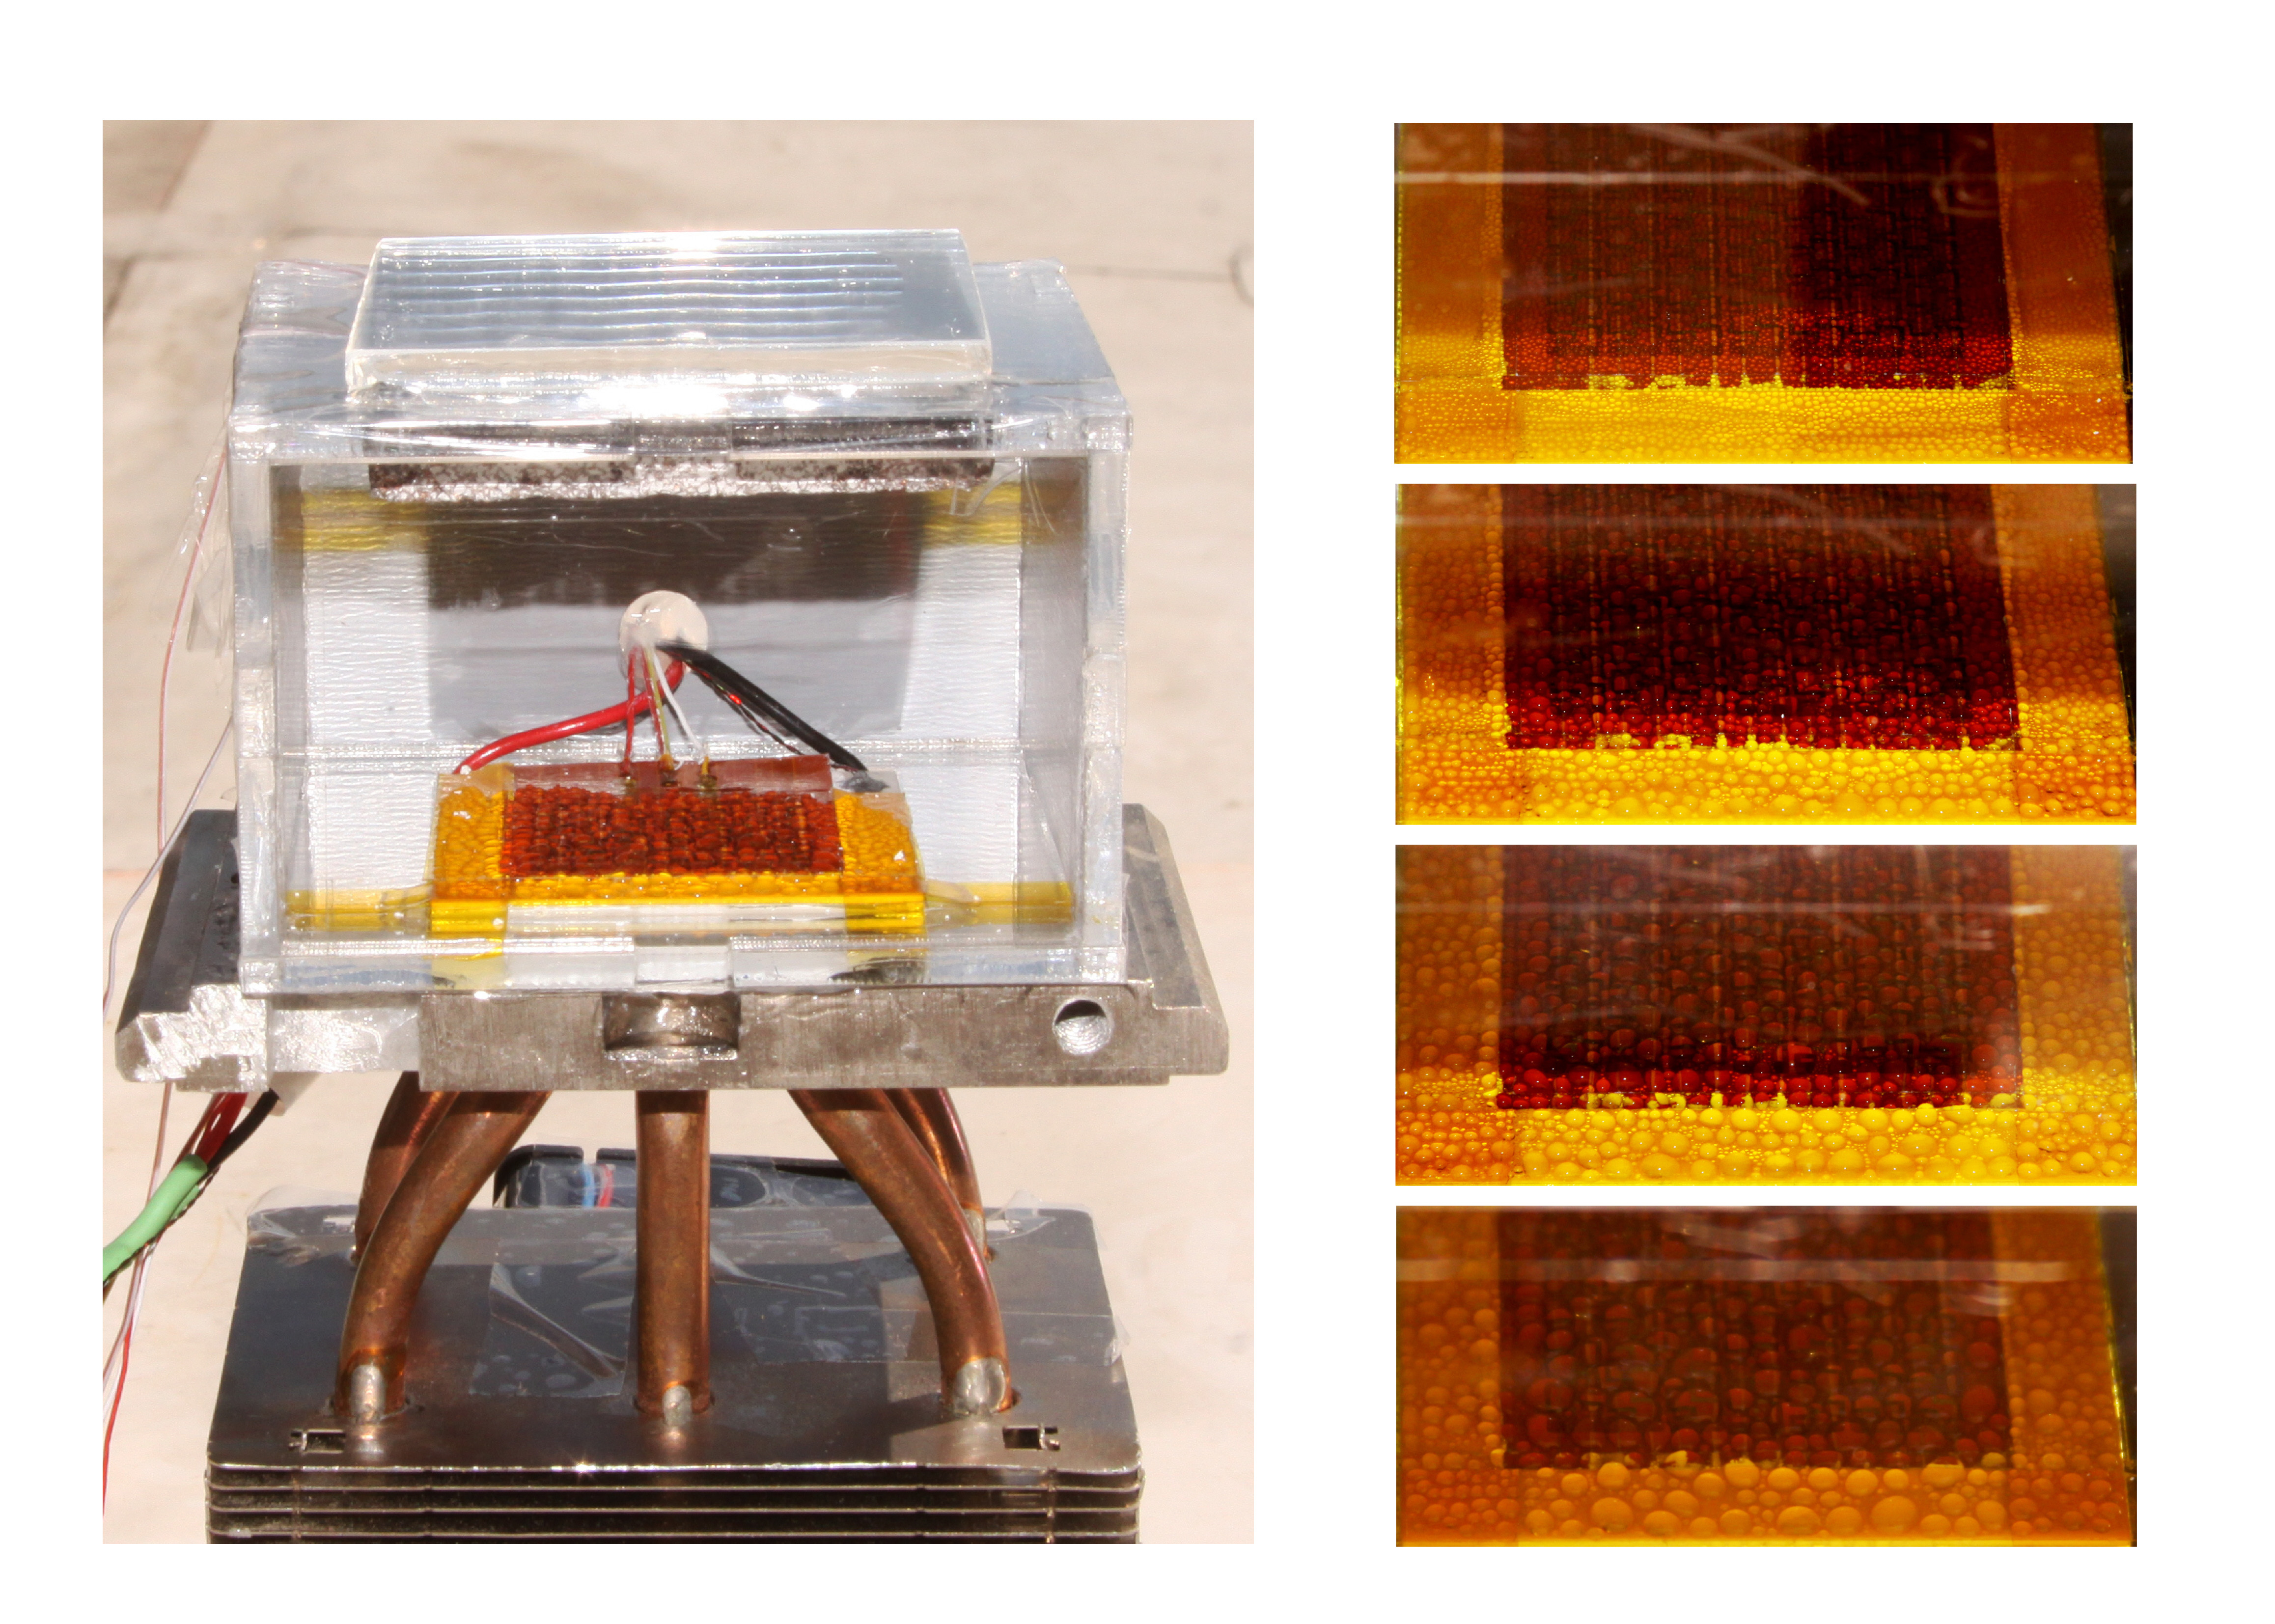 Images of the device’s condenser over time (on the right, running from top to bottom) show a steady increase in water droplets through the day.